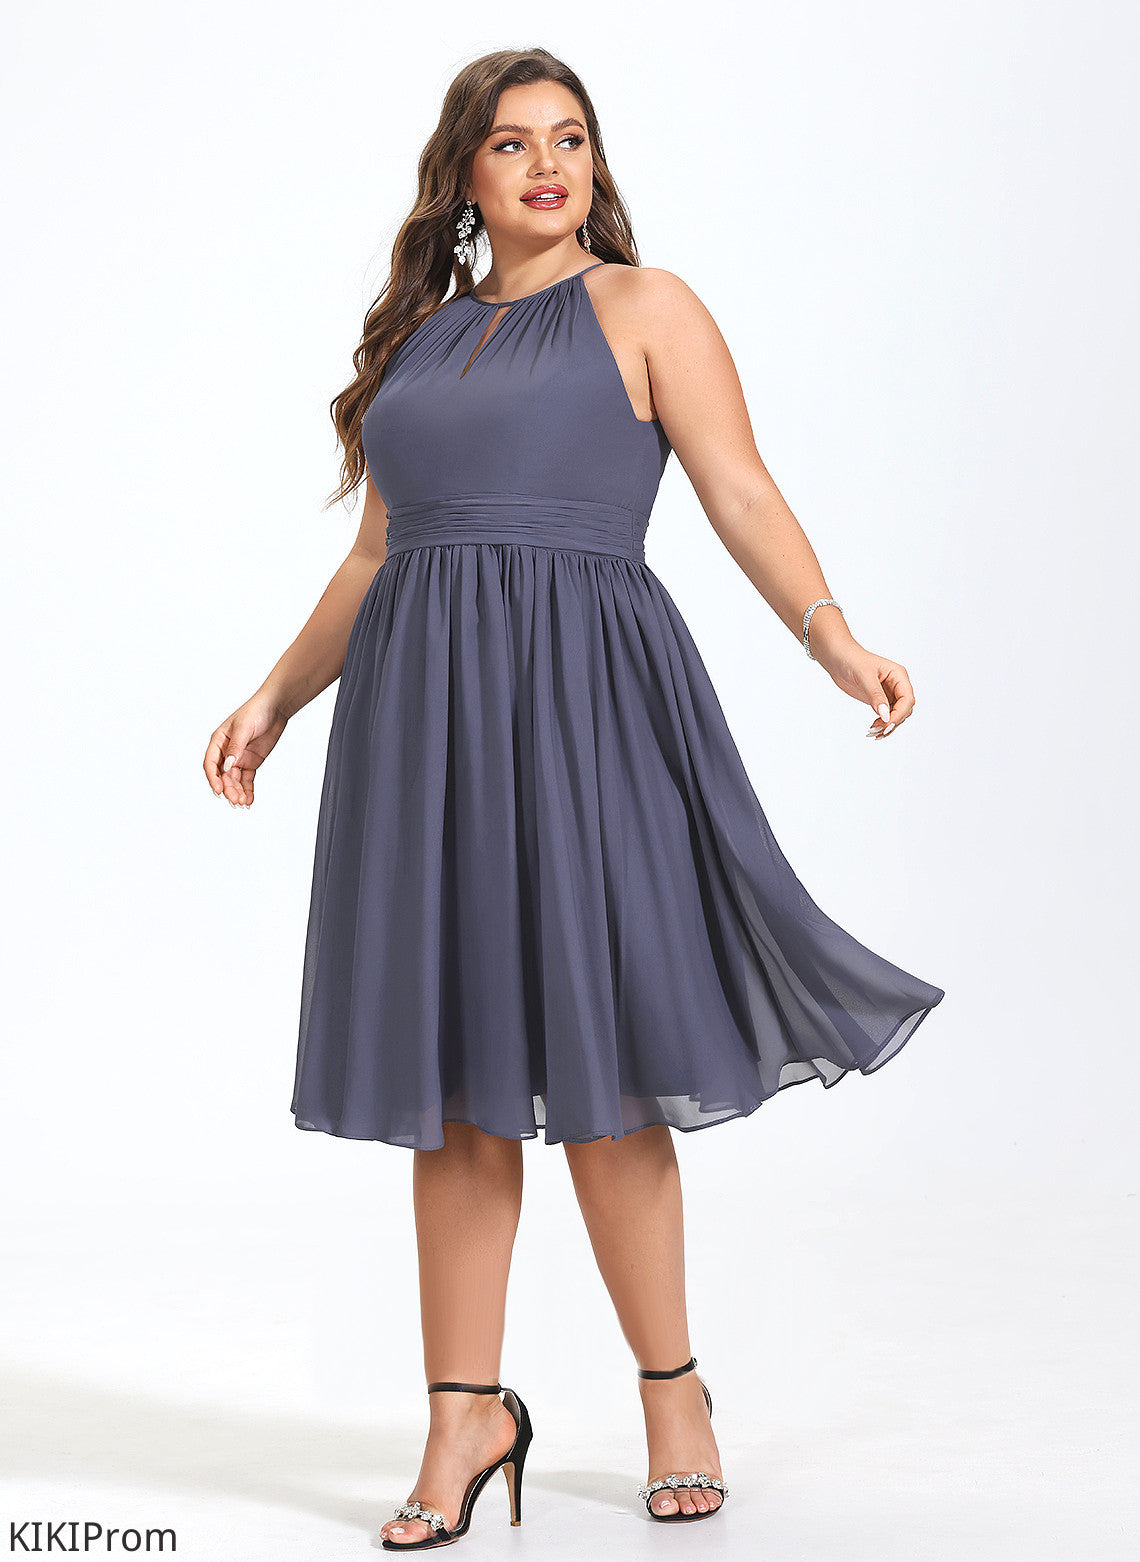 Ruffle Neck Cocktail Scoop Chiffon With Cocktail Dresses A-Line Knee-Length Danielle Dress